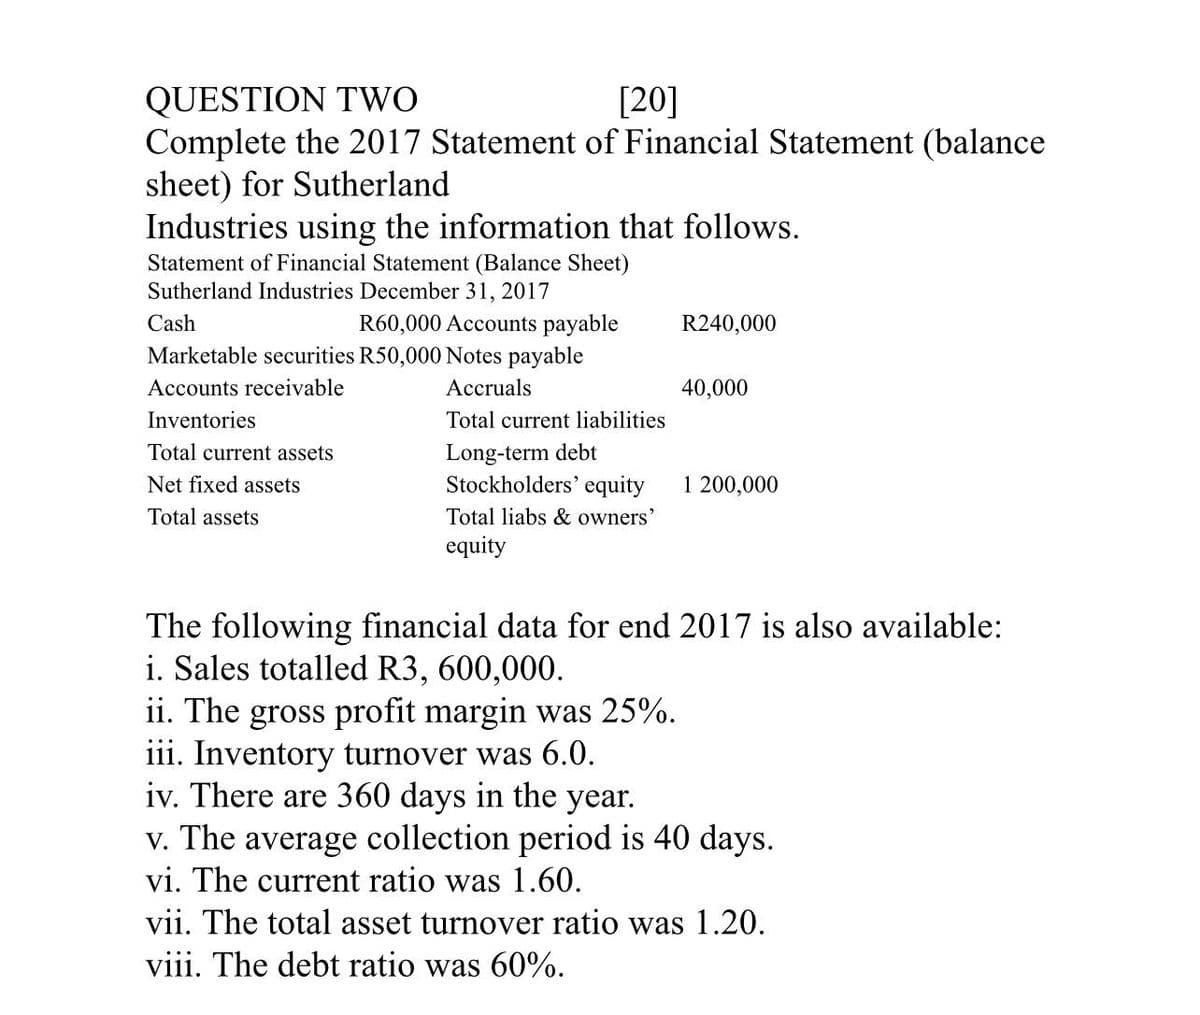 QUESTION TWO
[20]
Complete the 2017 Statement of Financial Statement (balance
sheet) for Sutherland
Industries using the information that follows.
Statement of Financial Statement (Balance Sheet)
Sutherland Industries December 31, 2017
Cash
Marketable securities R50,000 Notes payable
R60,000 Accounts payable
R240,000
Accounts receivable
Accruals
40,000
Inventories
Total current liabilities
Total current assets
Long-term debt
Net fixed assets
Total assets
Stockholders' equity
1 200,000
Total liabs & owners'
equity
The following financial data for end 2017 is also available:
i. Sales totalled R3, 600,000.
ii. The gross profit margin was 25%.
iii. Inventory turnover was 6.0.
iv. There are 360 days in the year.
v. The average collection period is 40 days.
vi. The current ratio was 1.60.
vii. The total asset turnover ratio was 1.20.
viii. The debt ratio was 60%.